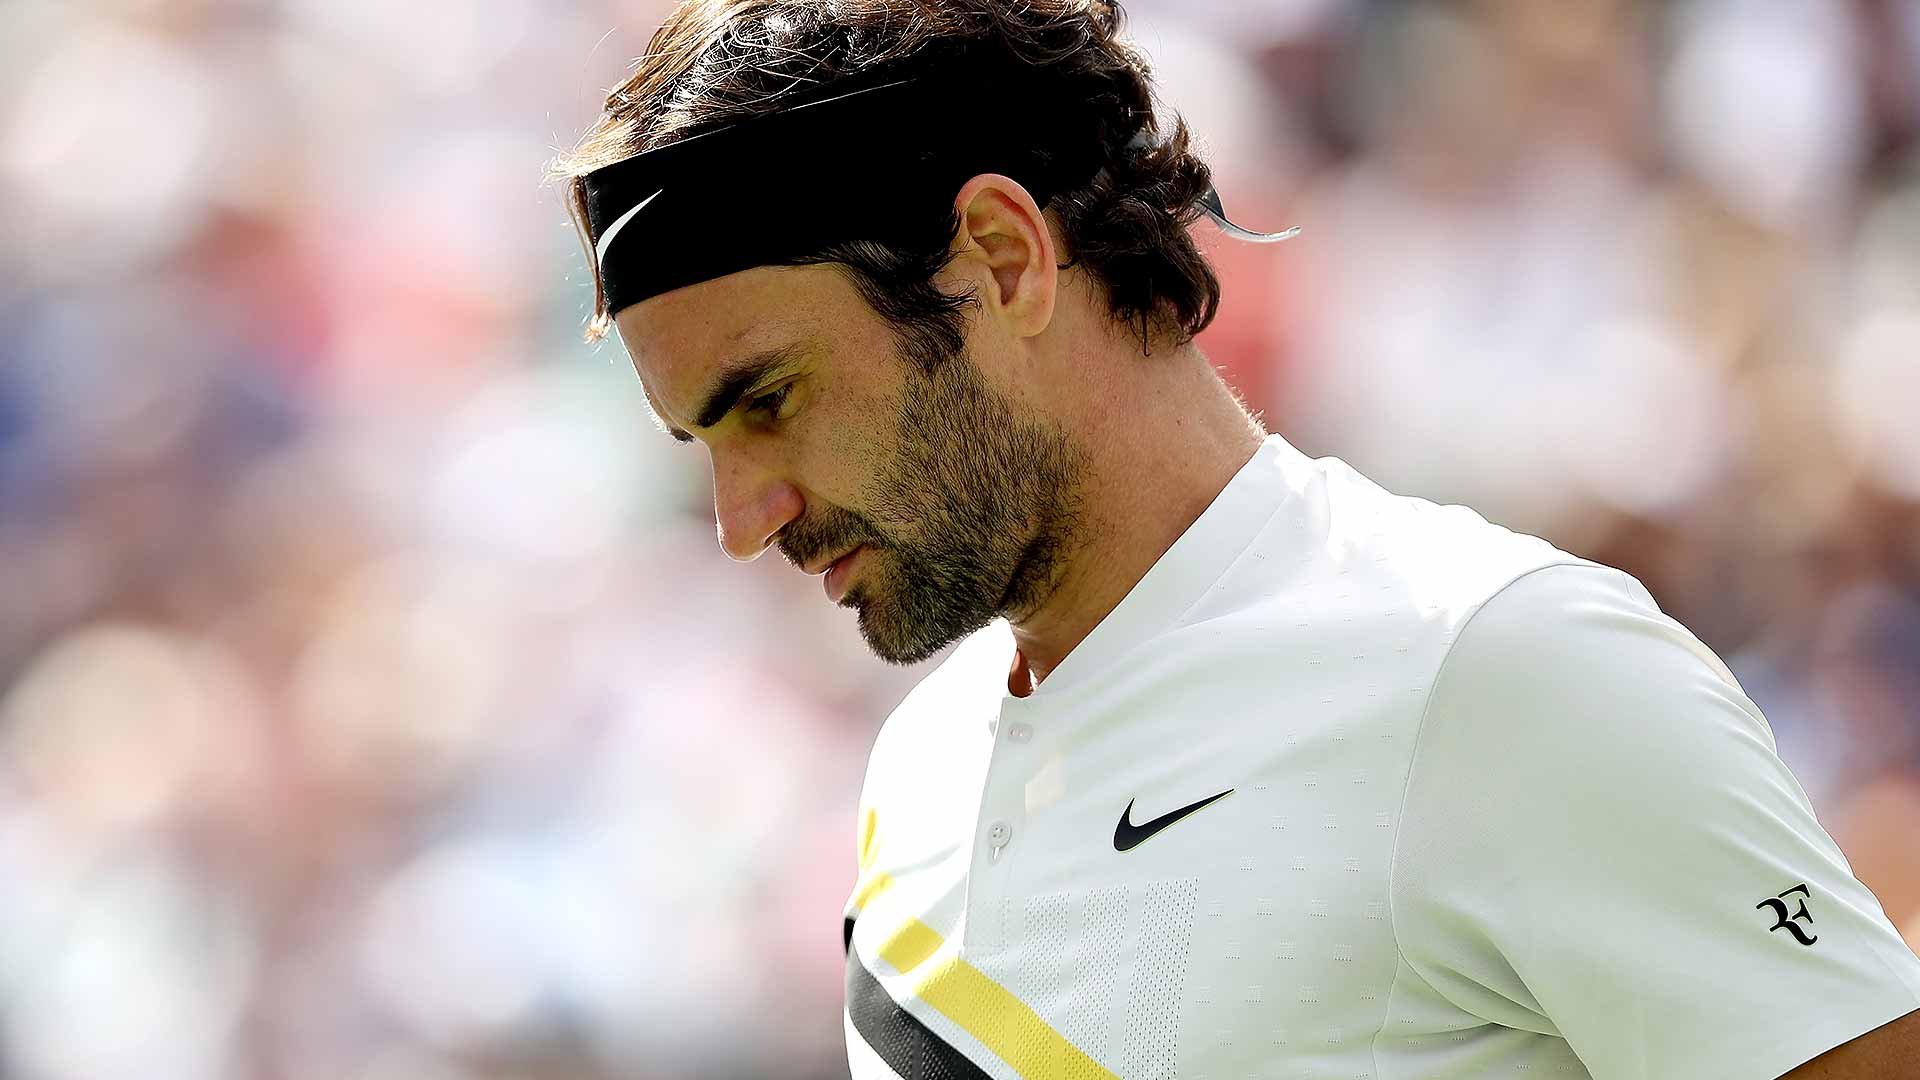 Roger Federer loses his first match of the season on Sunday against Juan Martin del Potro during the BNP Paribas Open final.